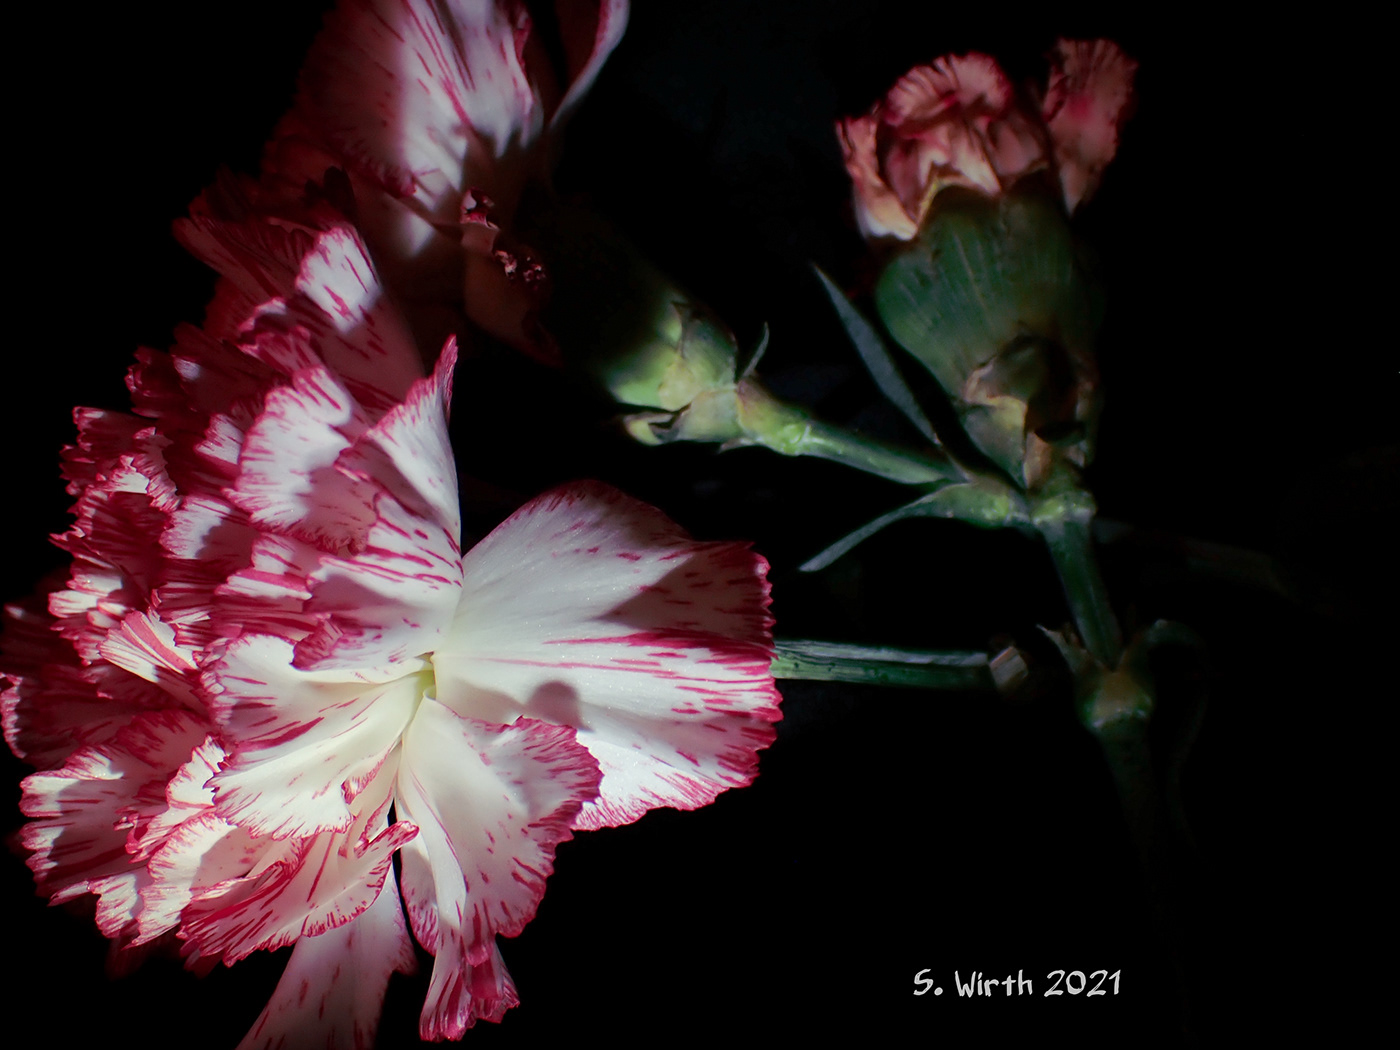 art blossoms carnation clove droplets dying March 2021 Stefan F. Wirth story withering